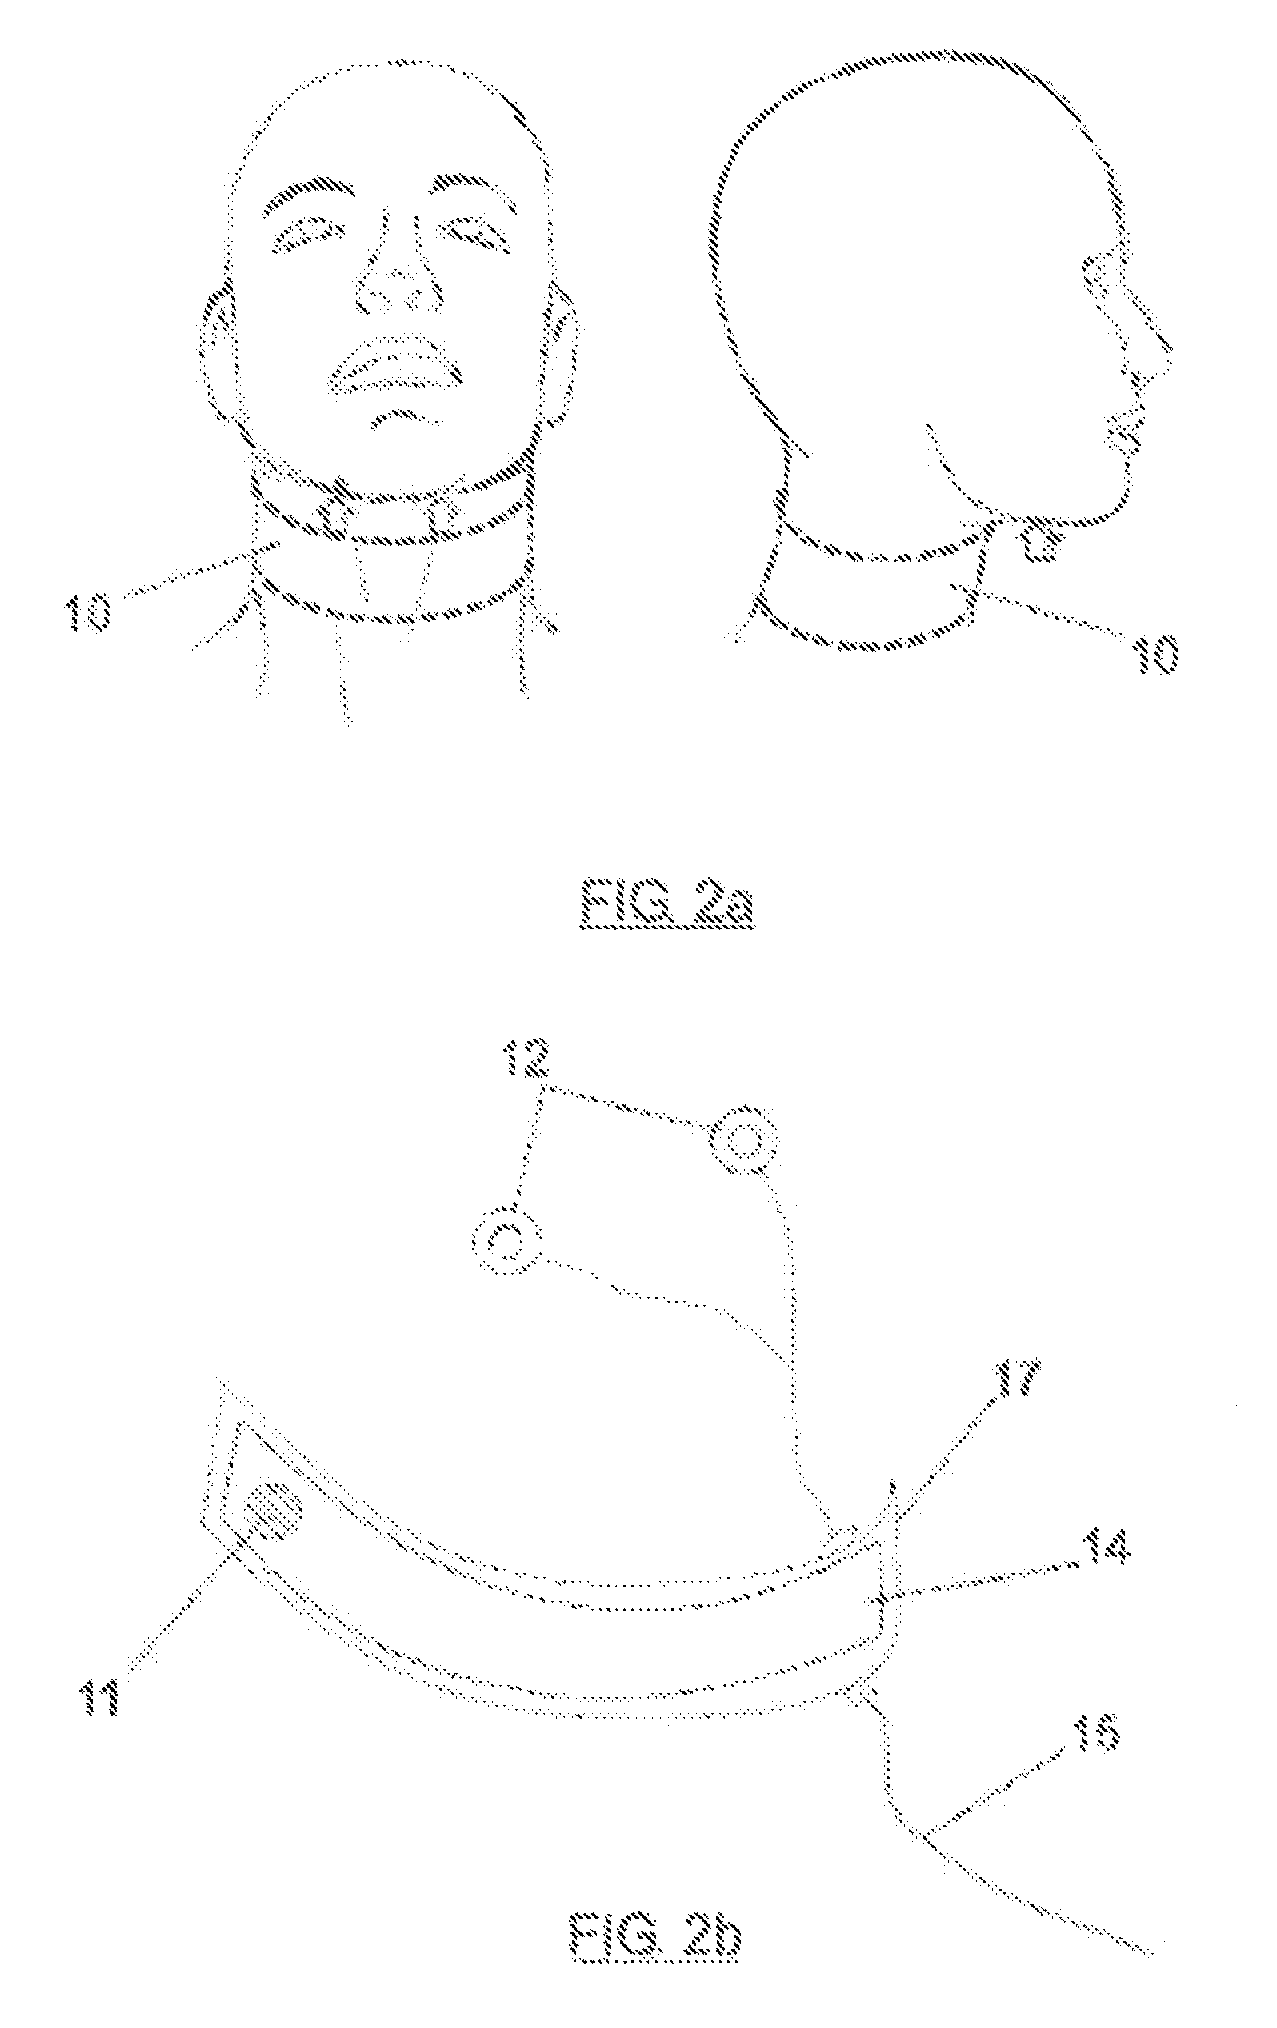 Electrostimulation method and system for the treatment of sleep apnea